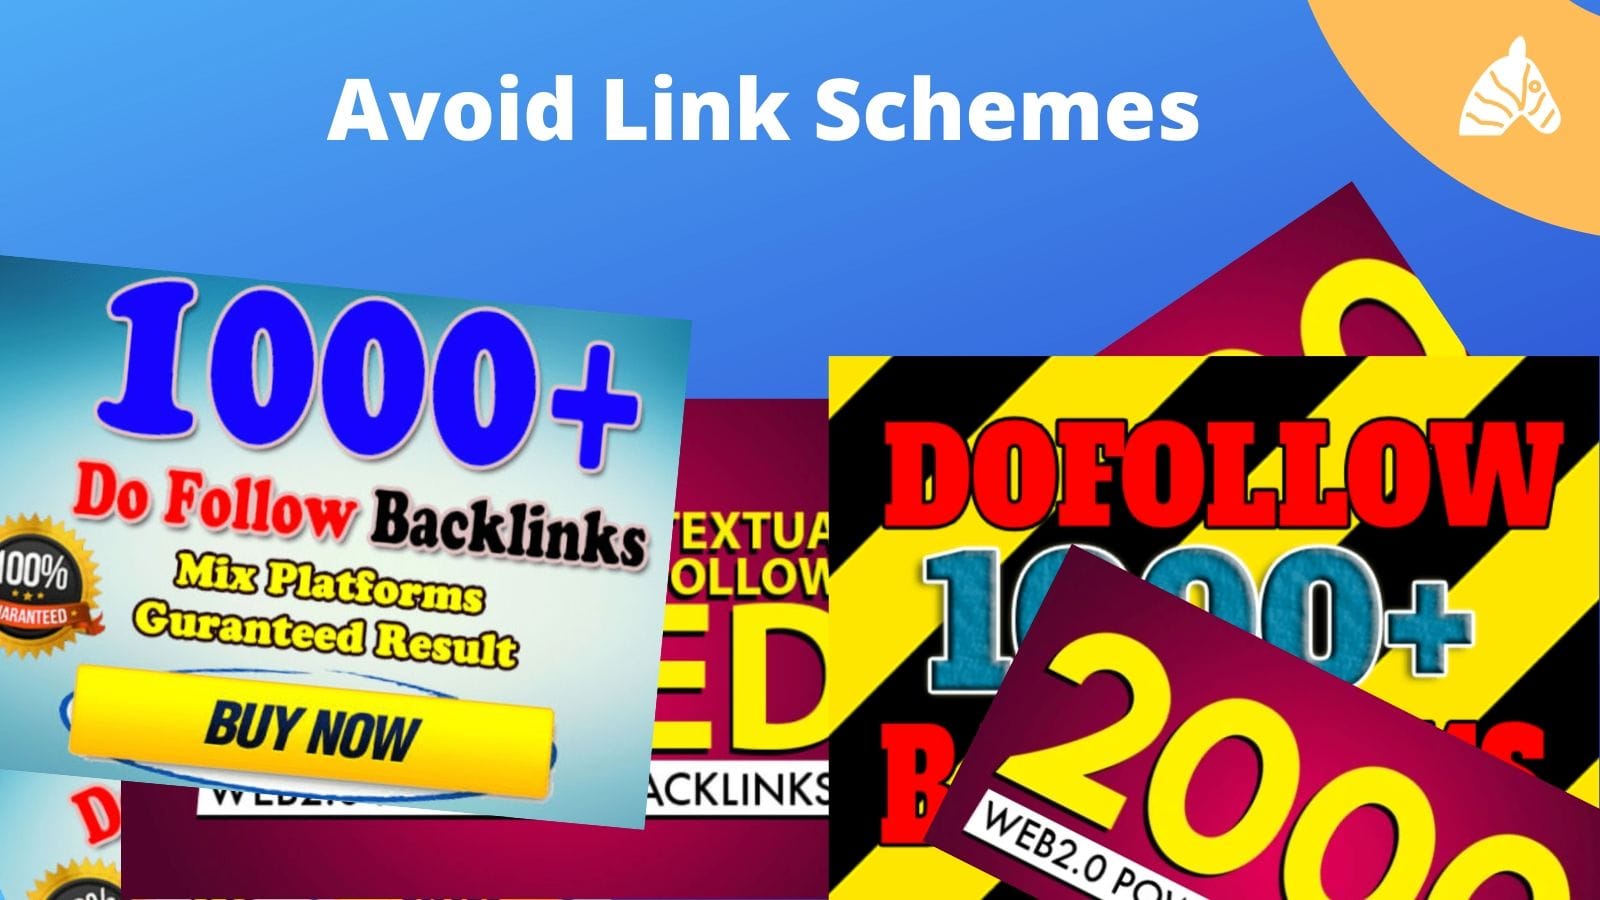 link building schemes that SEO scam companies participate in